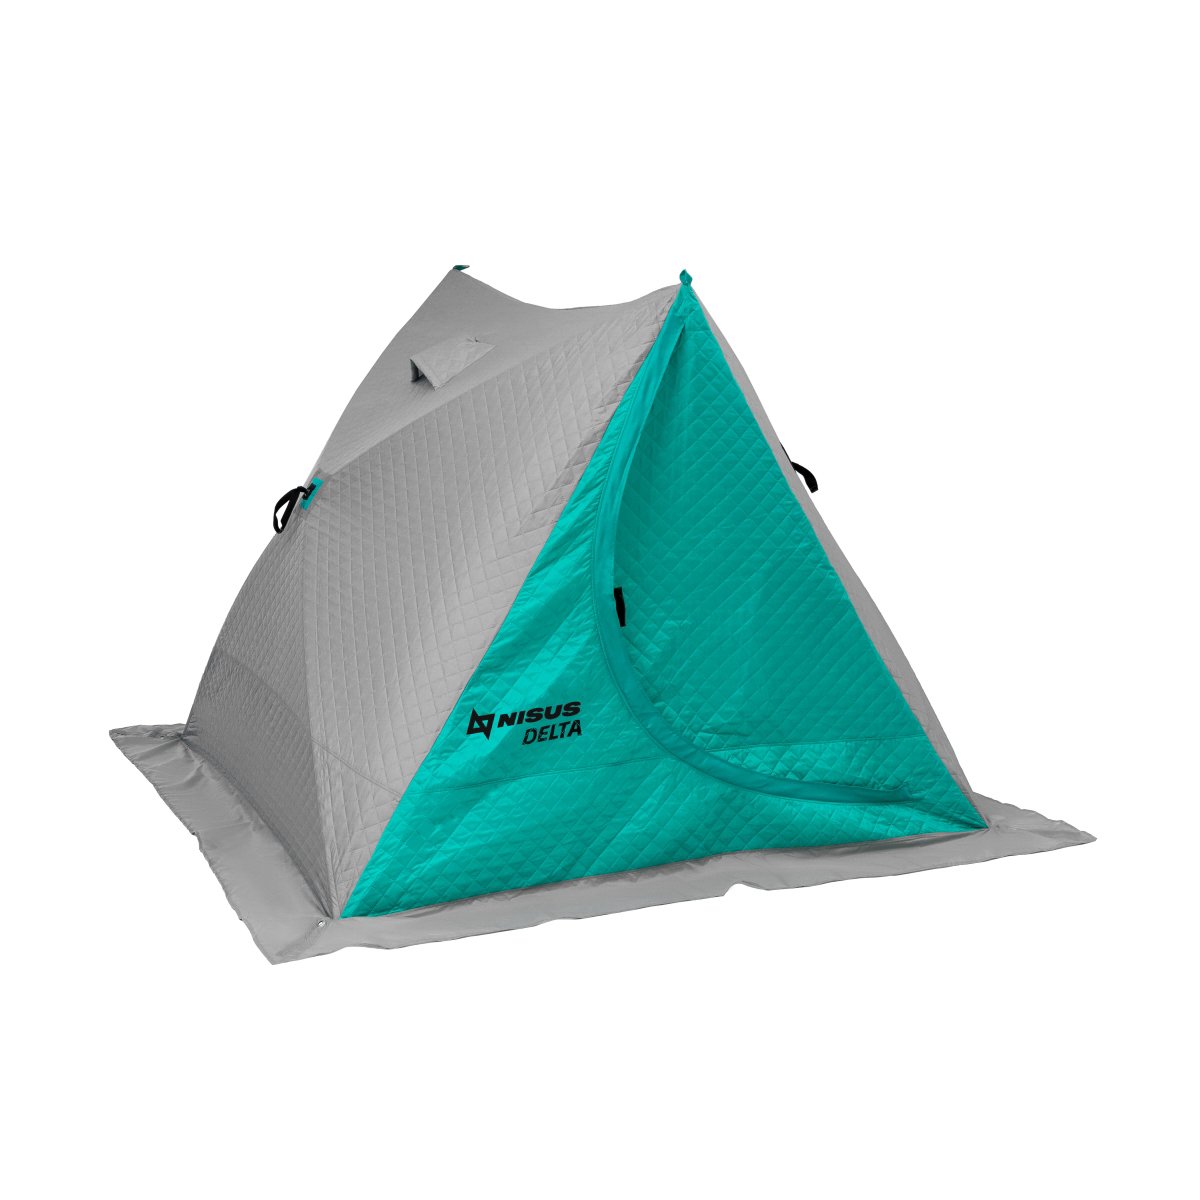 Delta Portable Insulated Ice Fishing Tent Shelter for 2 Persons, Gray and Turquoise